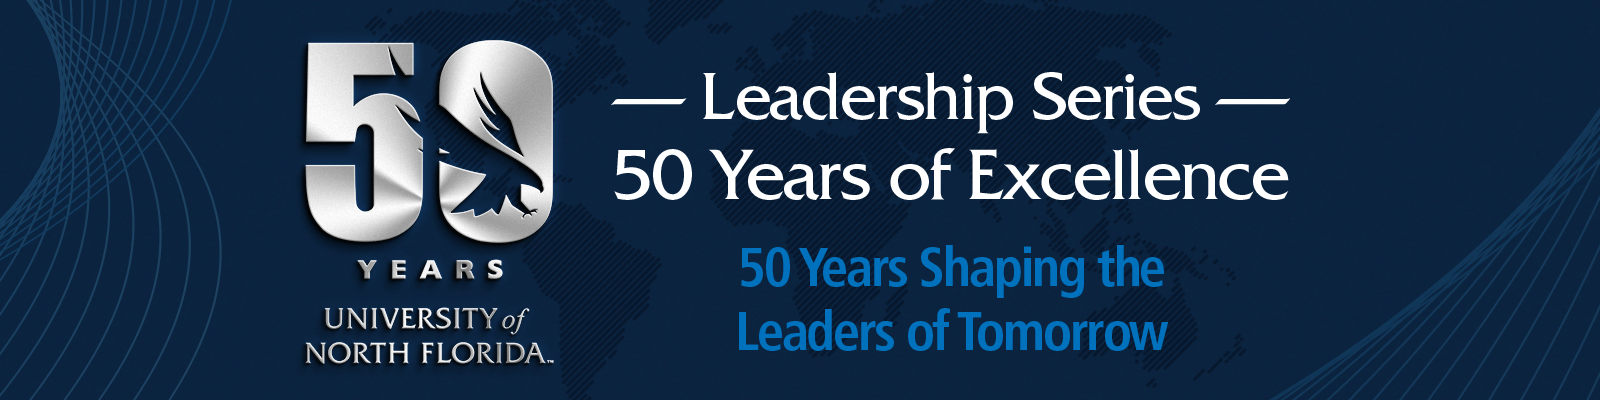 50 years of excellence - shaping the leaders of tomorrow and unf logo